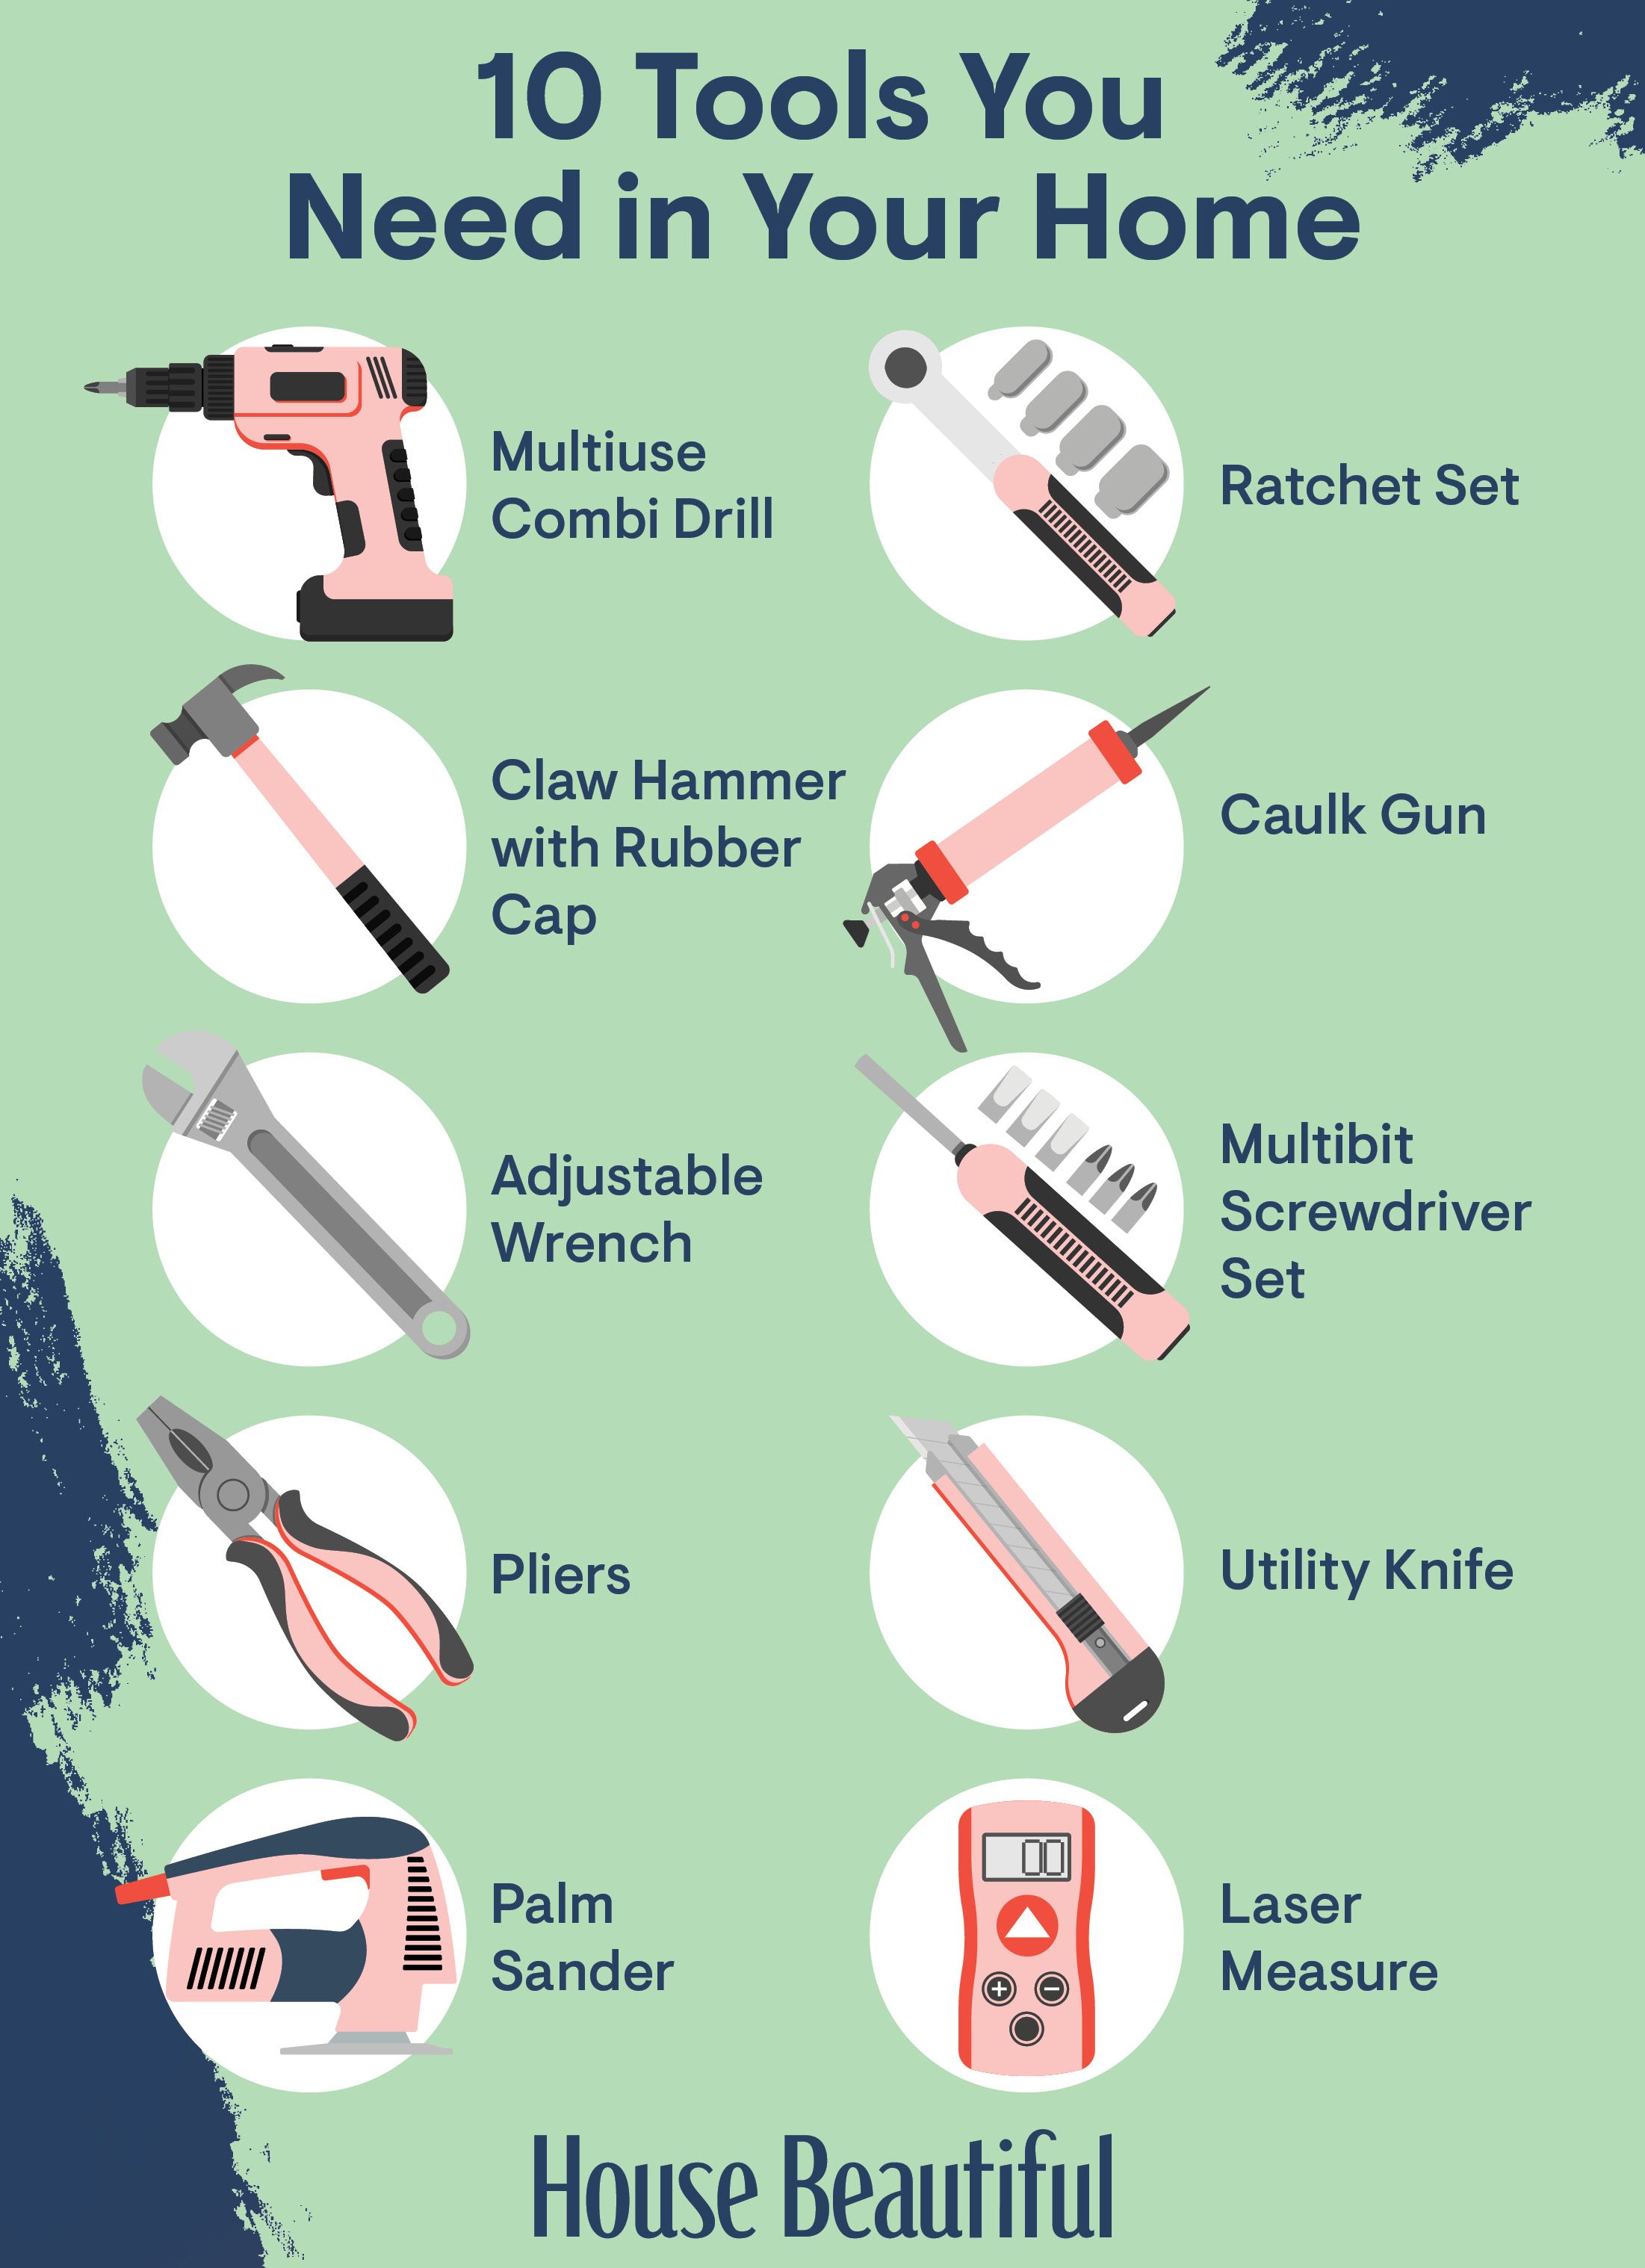 Tool School: 25 tools every homeowner should own - THE HOMESTUD